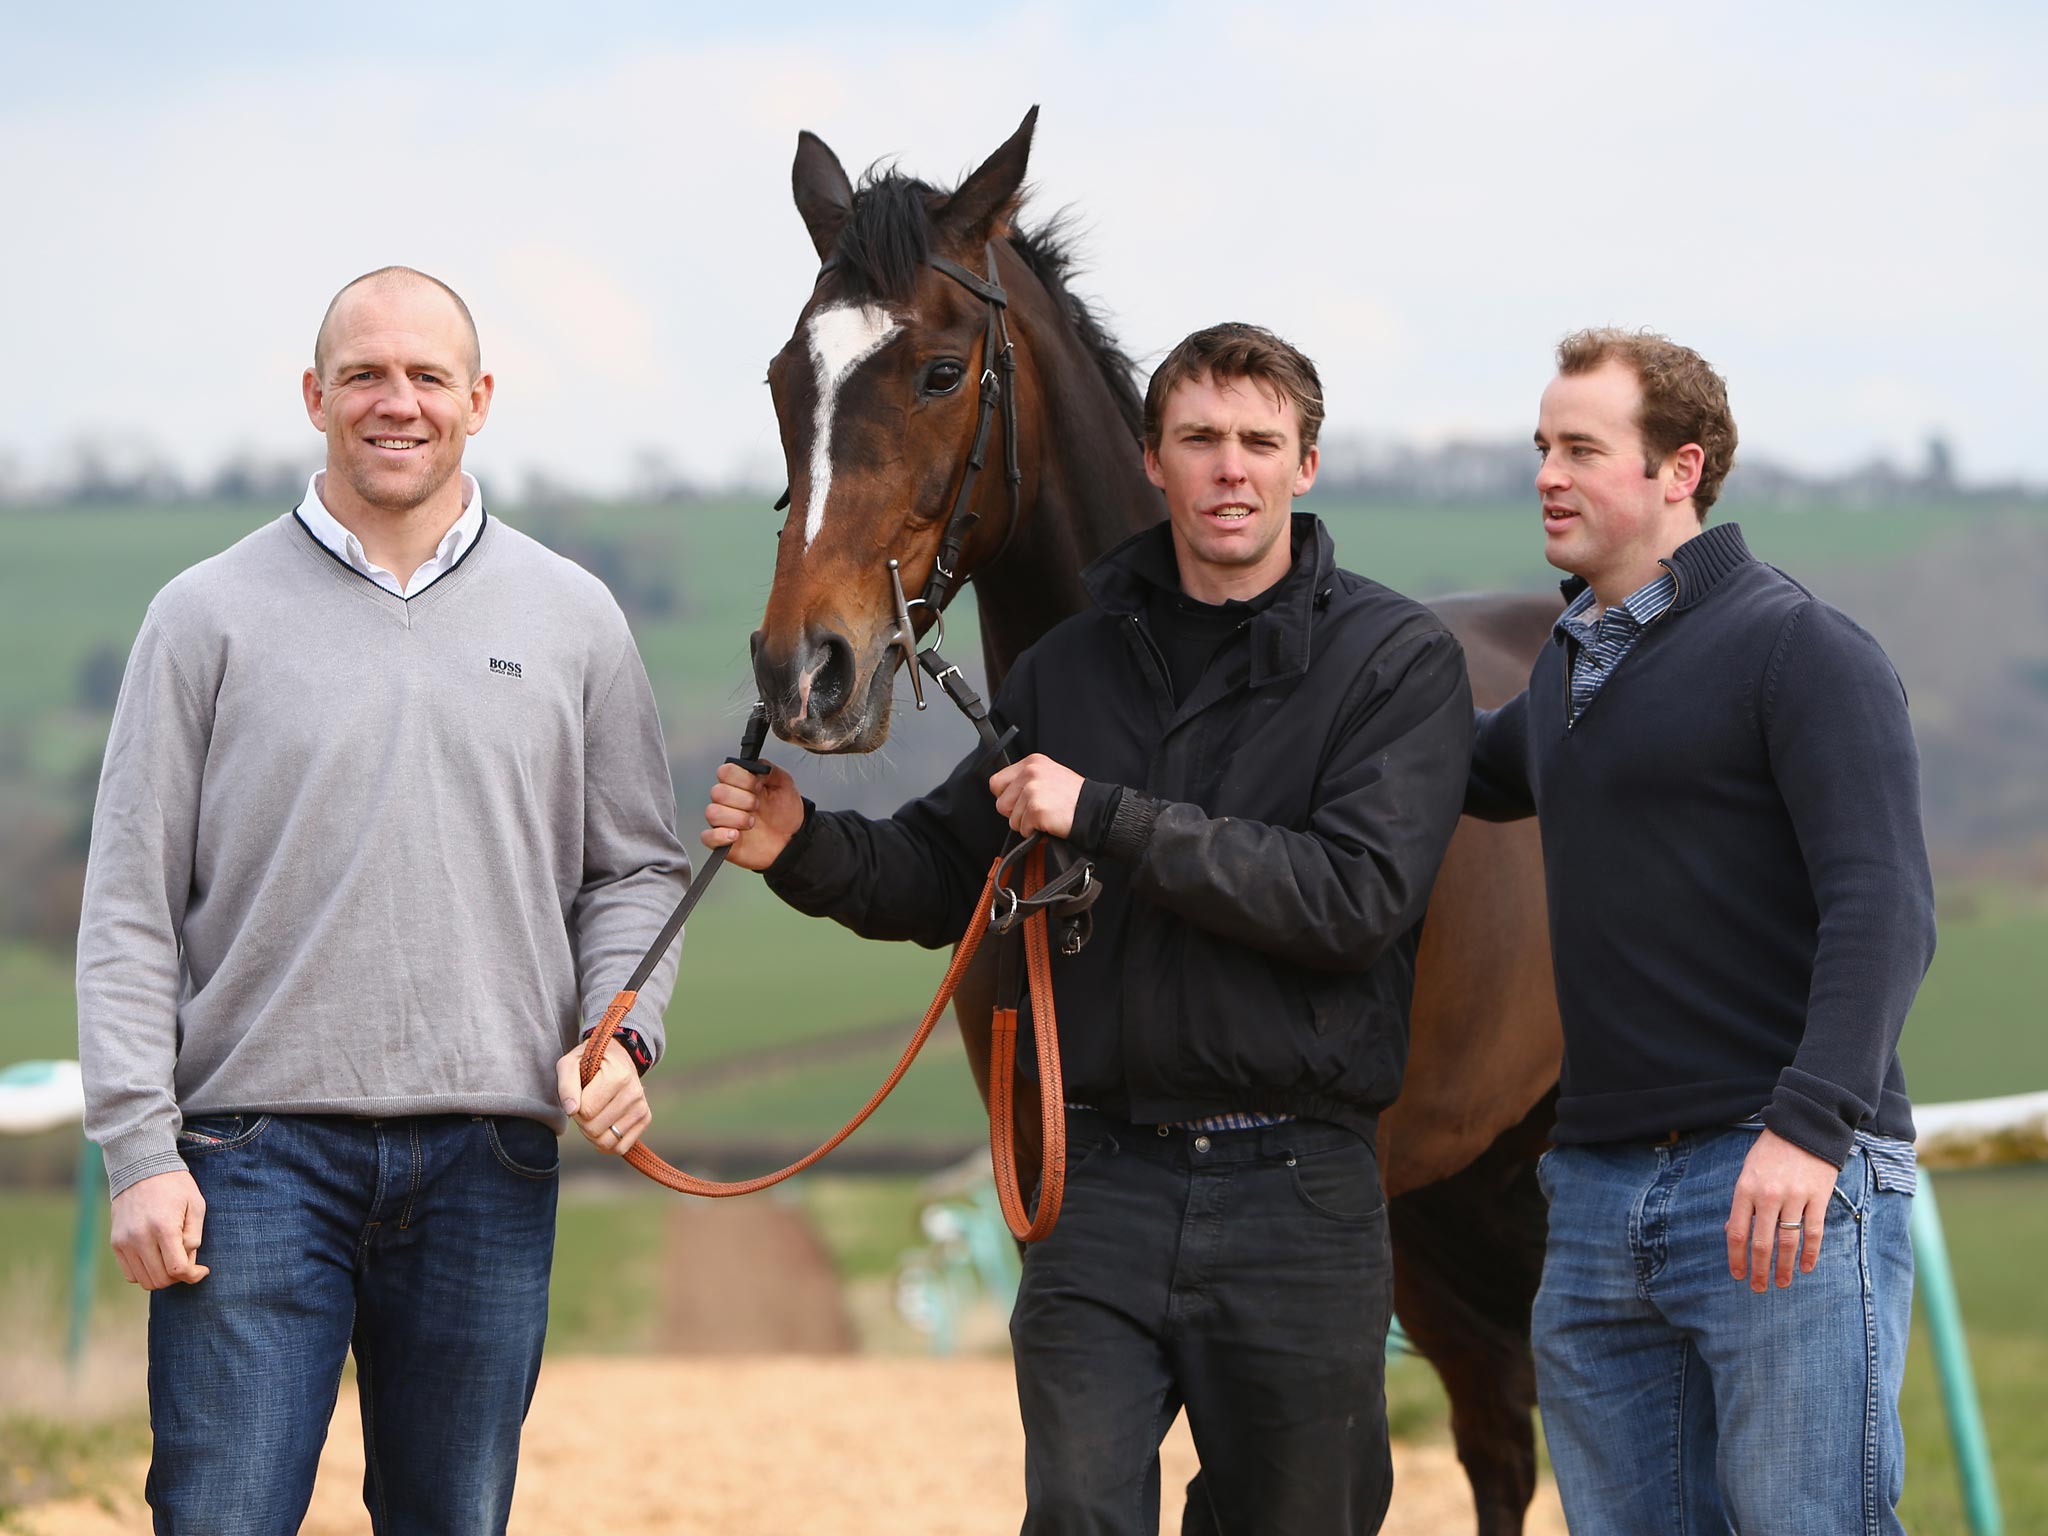 Gloucester and former England centre Mike Tindall alongside race horse Monbeg Dude, trainer Michael Scudamore and James Simpson-Daniel